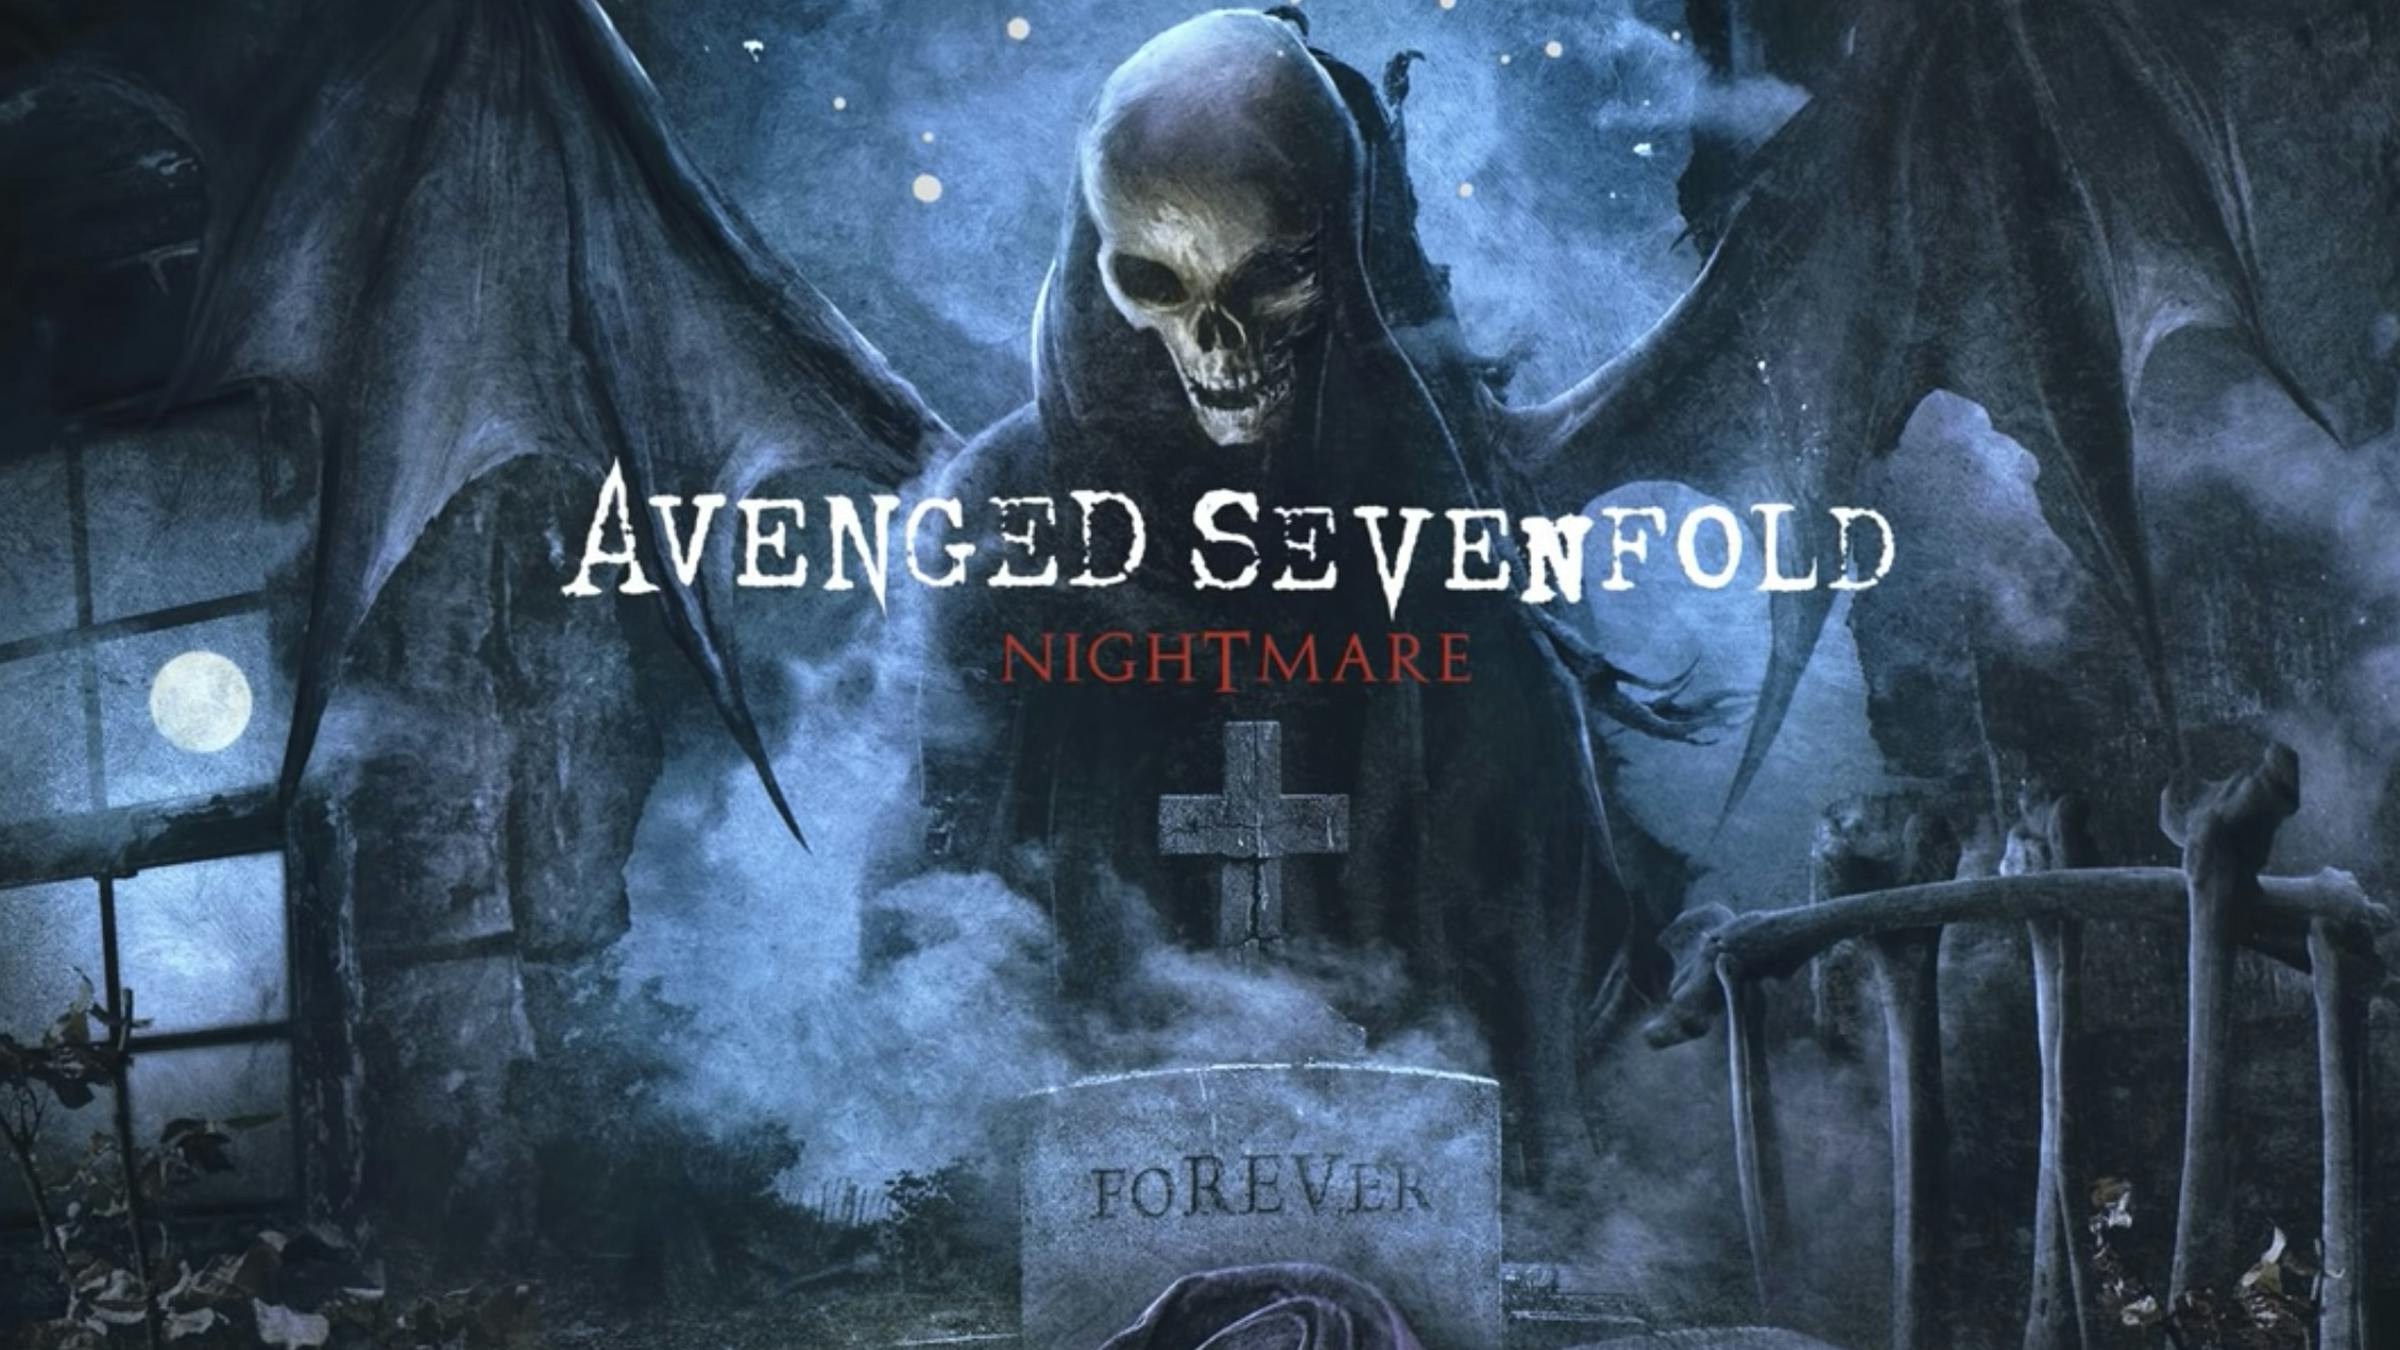 “Their brother must be immensely proud”: Our original 2010 review of Avenged Sevenfold’s Nightmare